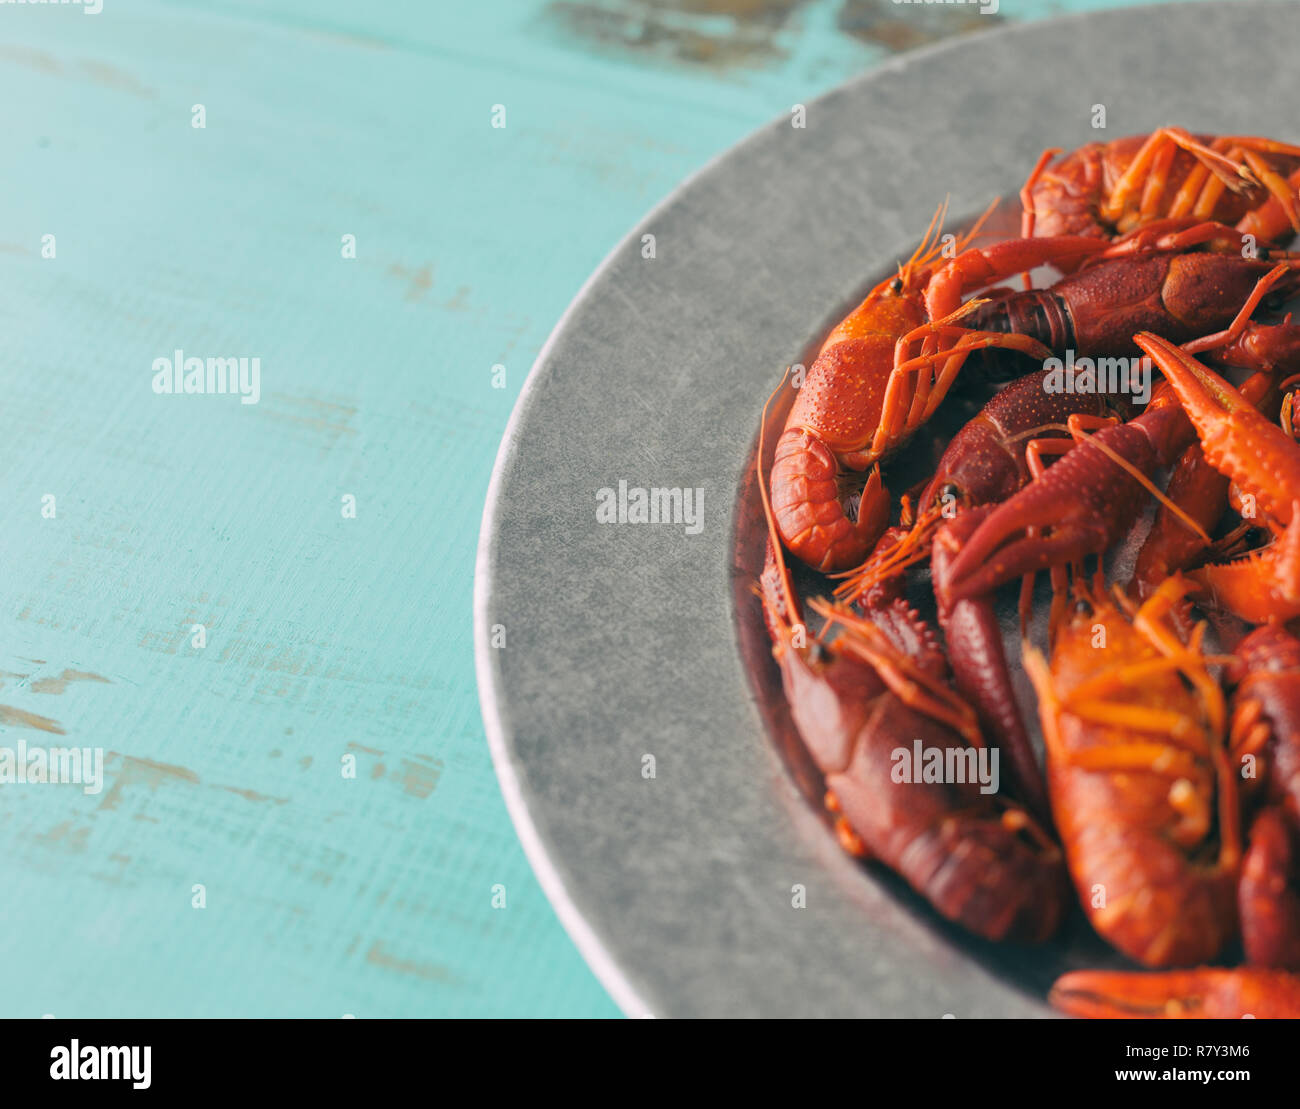 Several boiled crawfish on a galvanized steel plate. Stock Photo